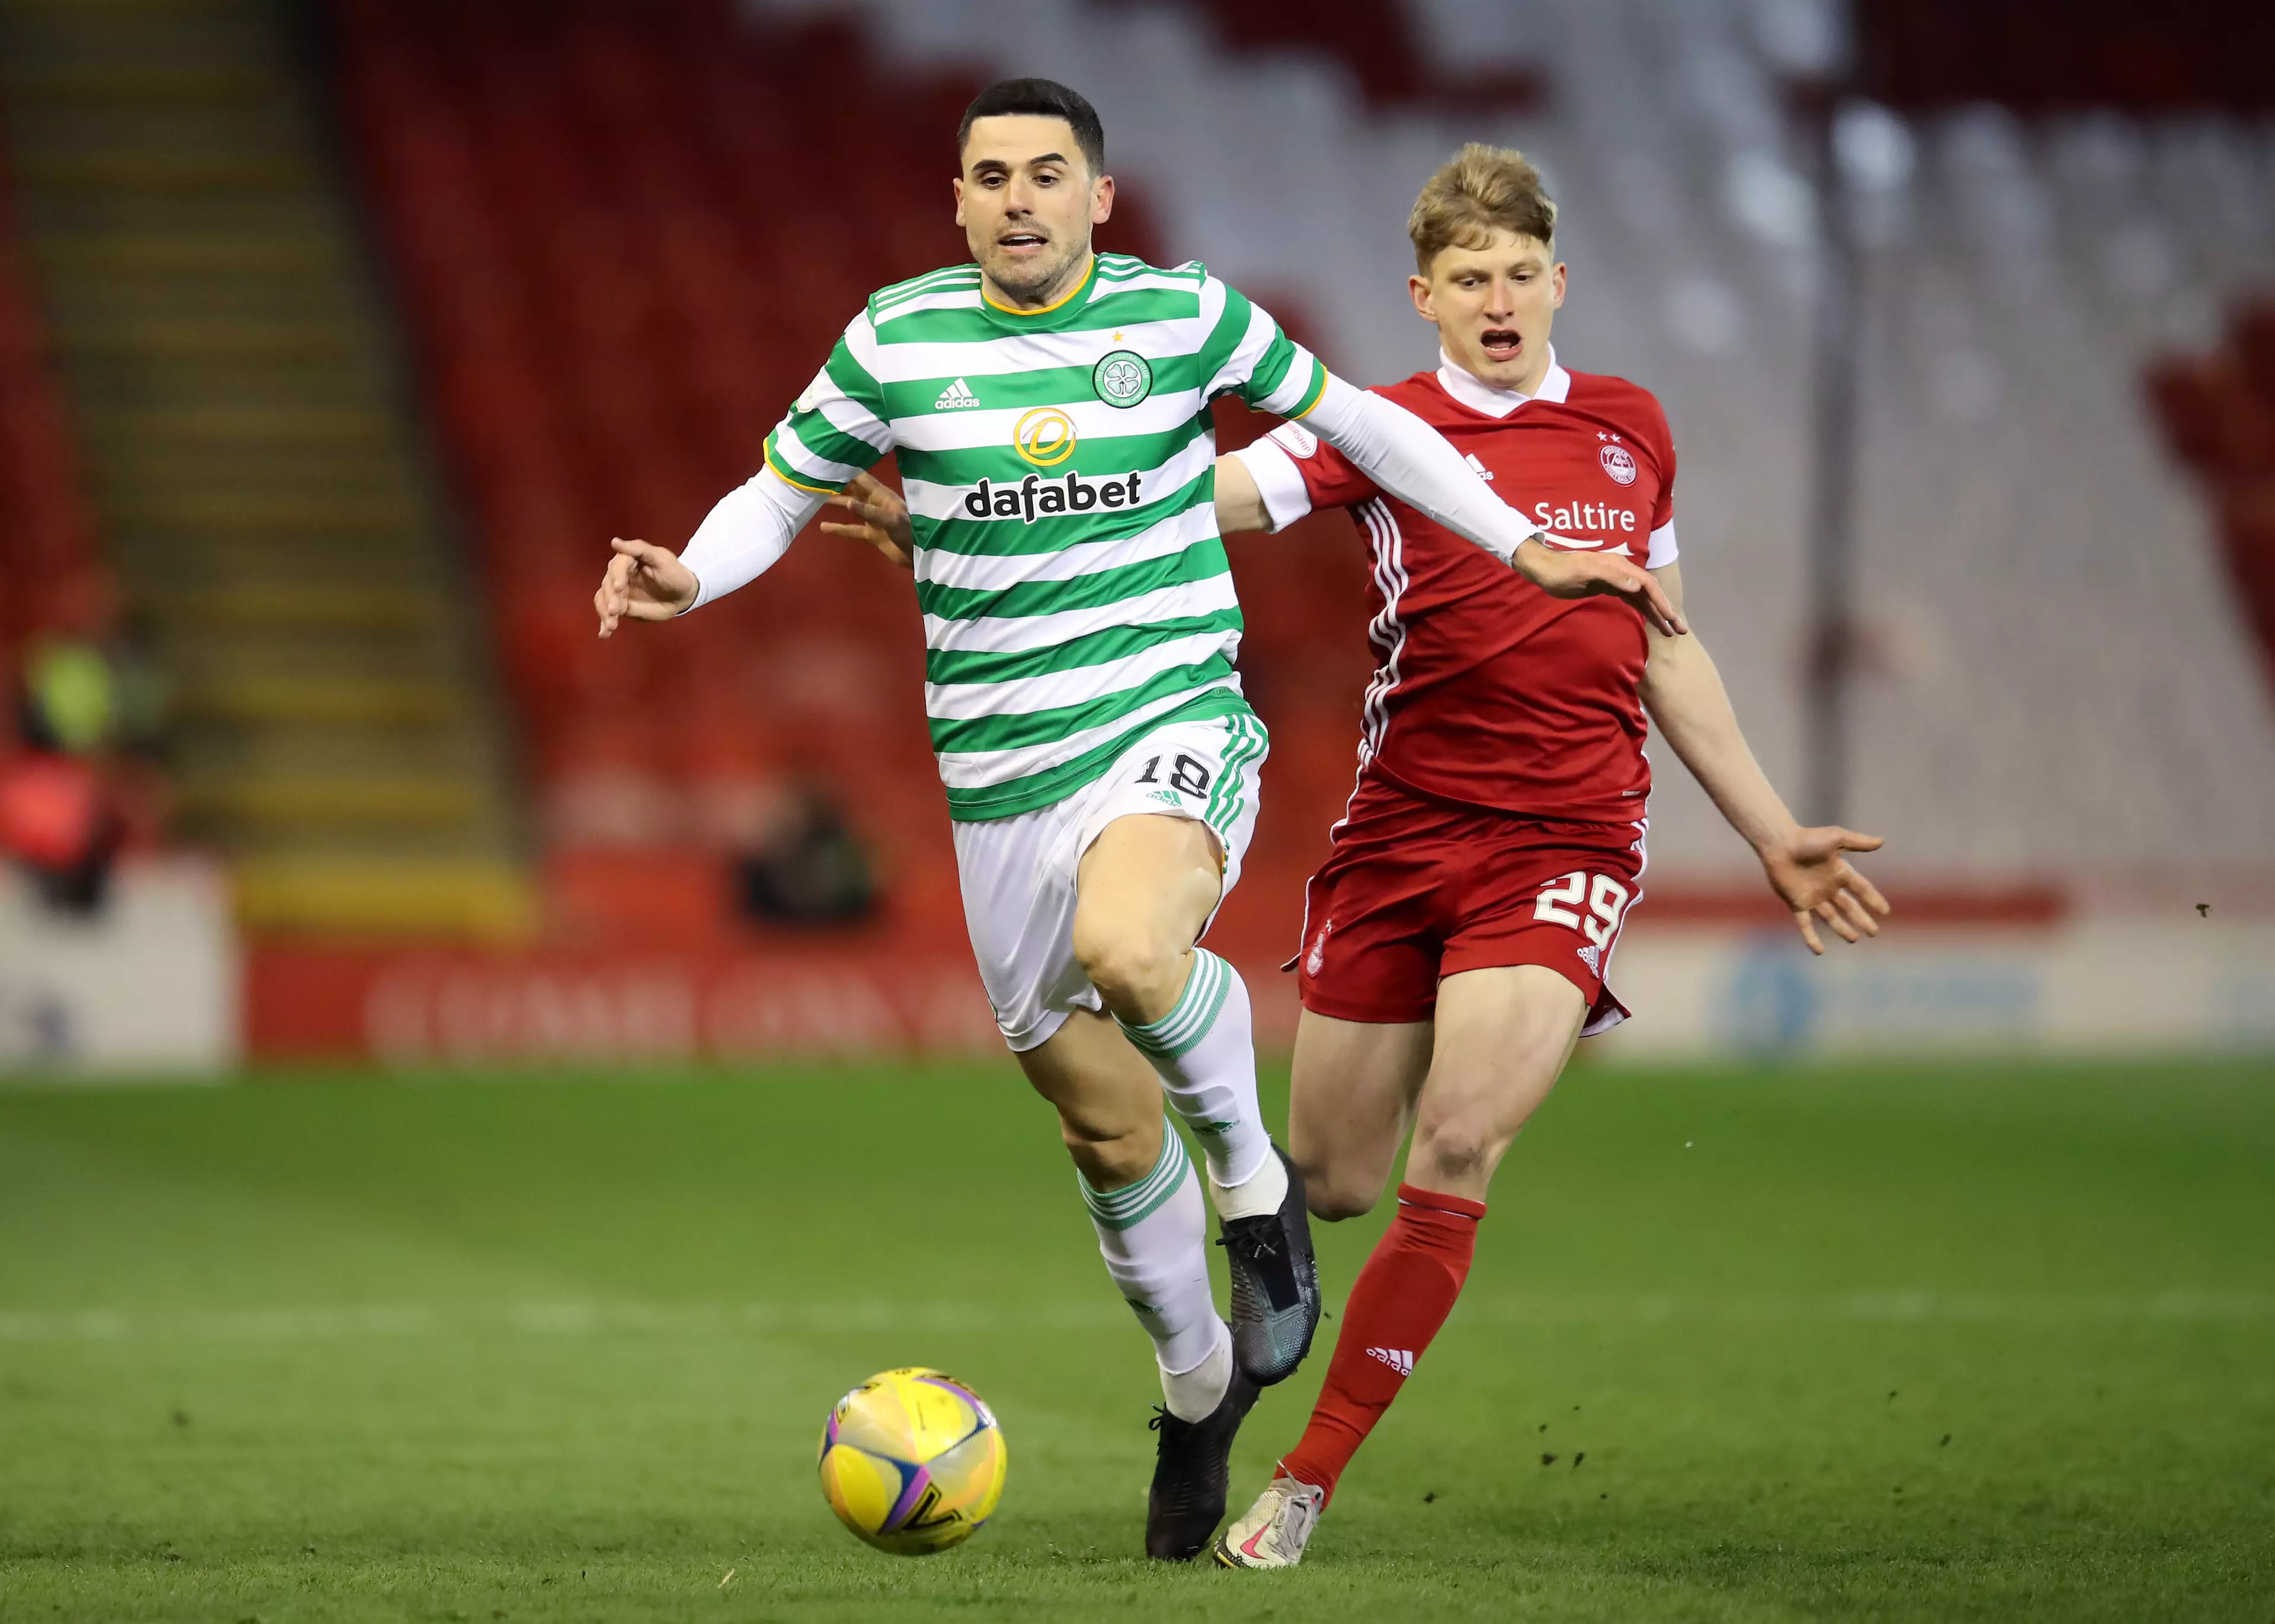 Postecoglou would join fellow compatriot Tom Rogic at Celtic.